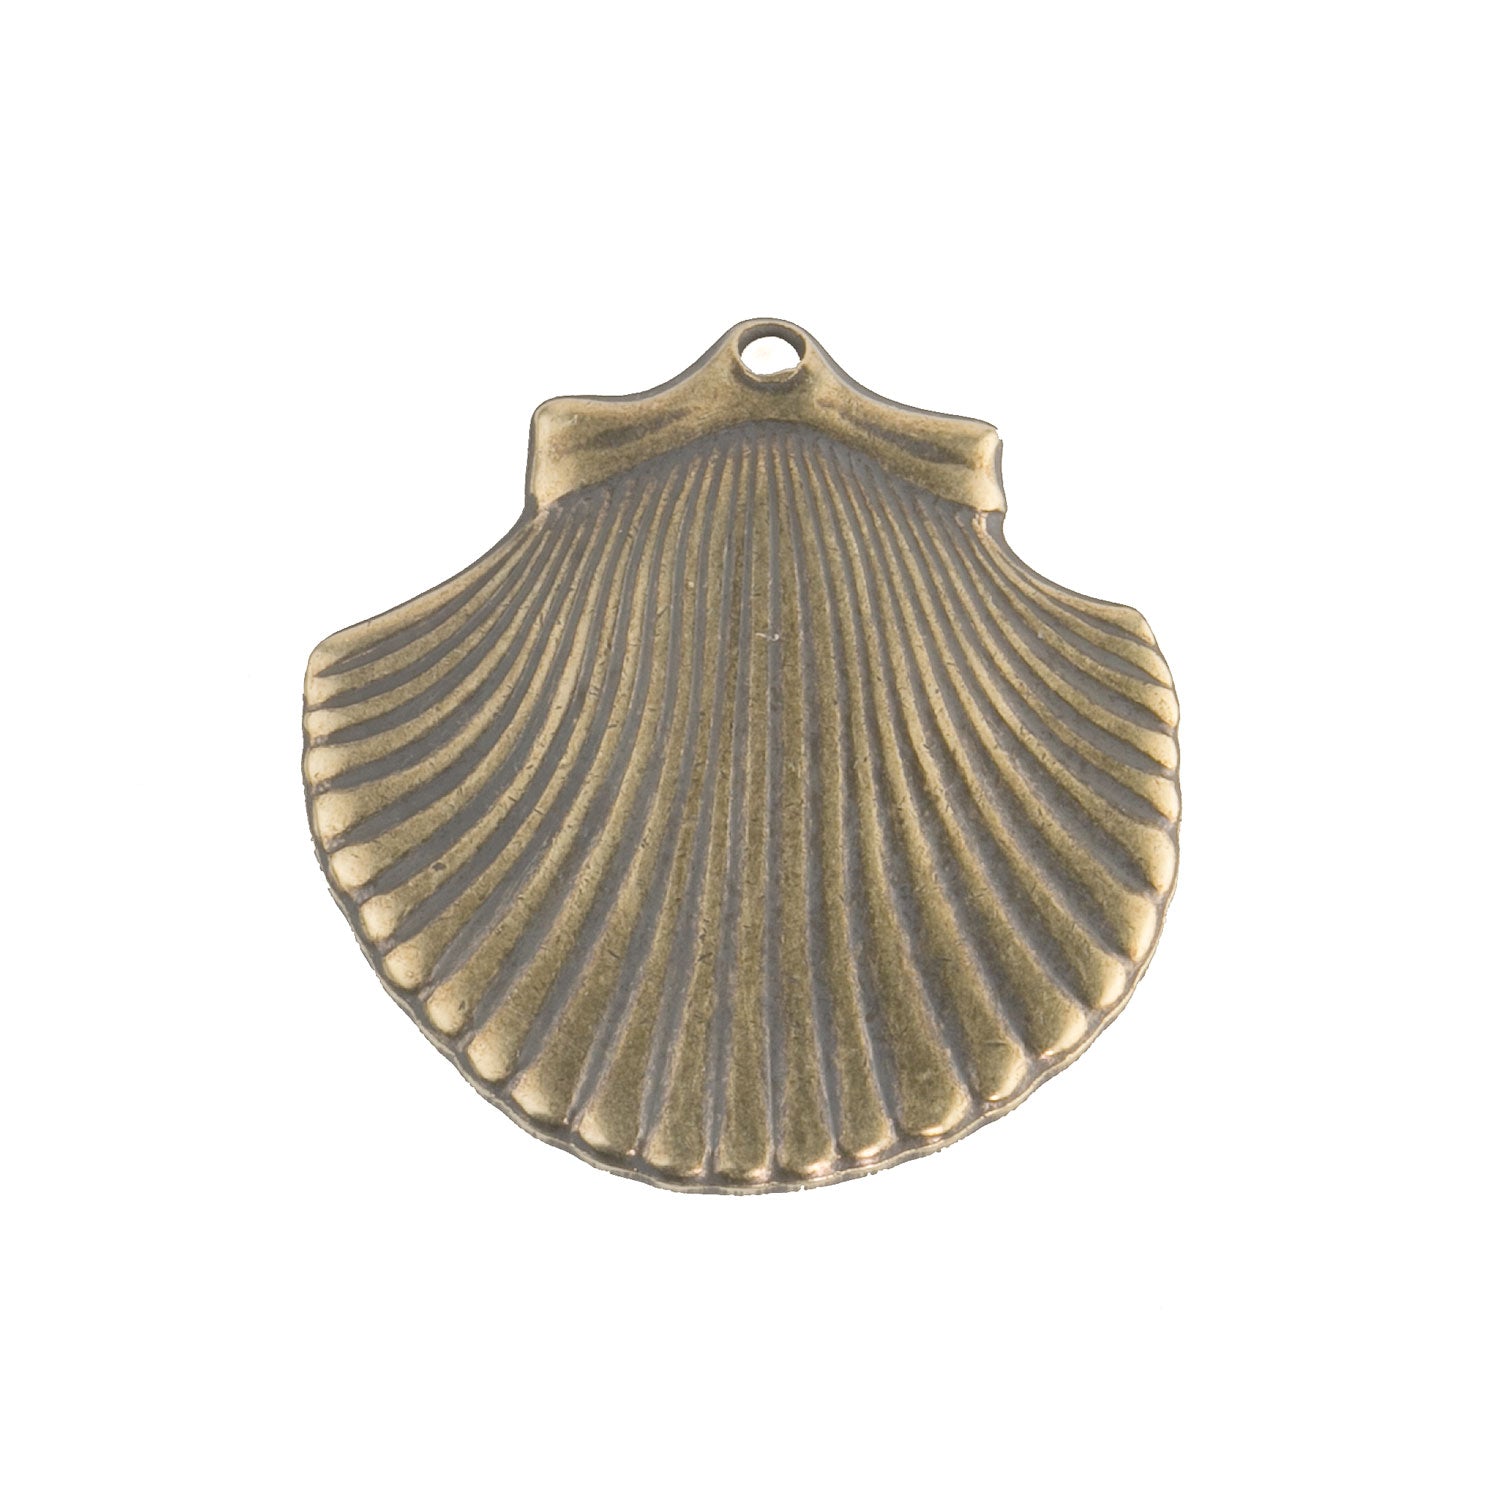 b9-0862-Vintage stamped brass seashell. 20mm Pkg. of 4 – Earthly